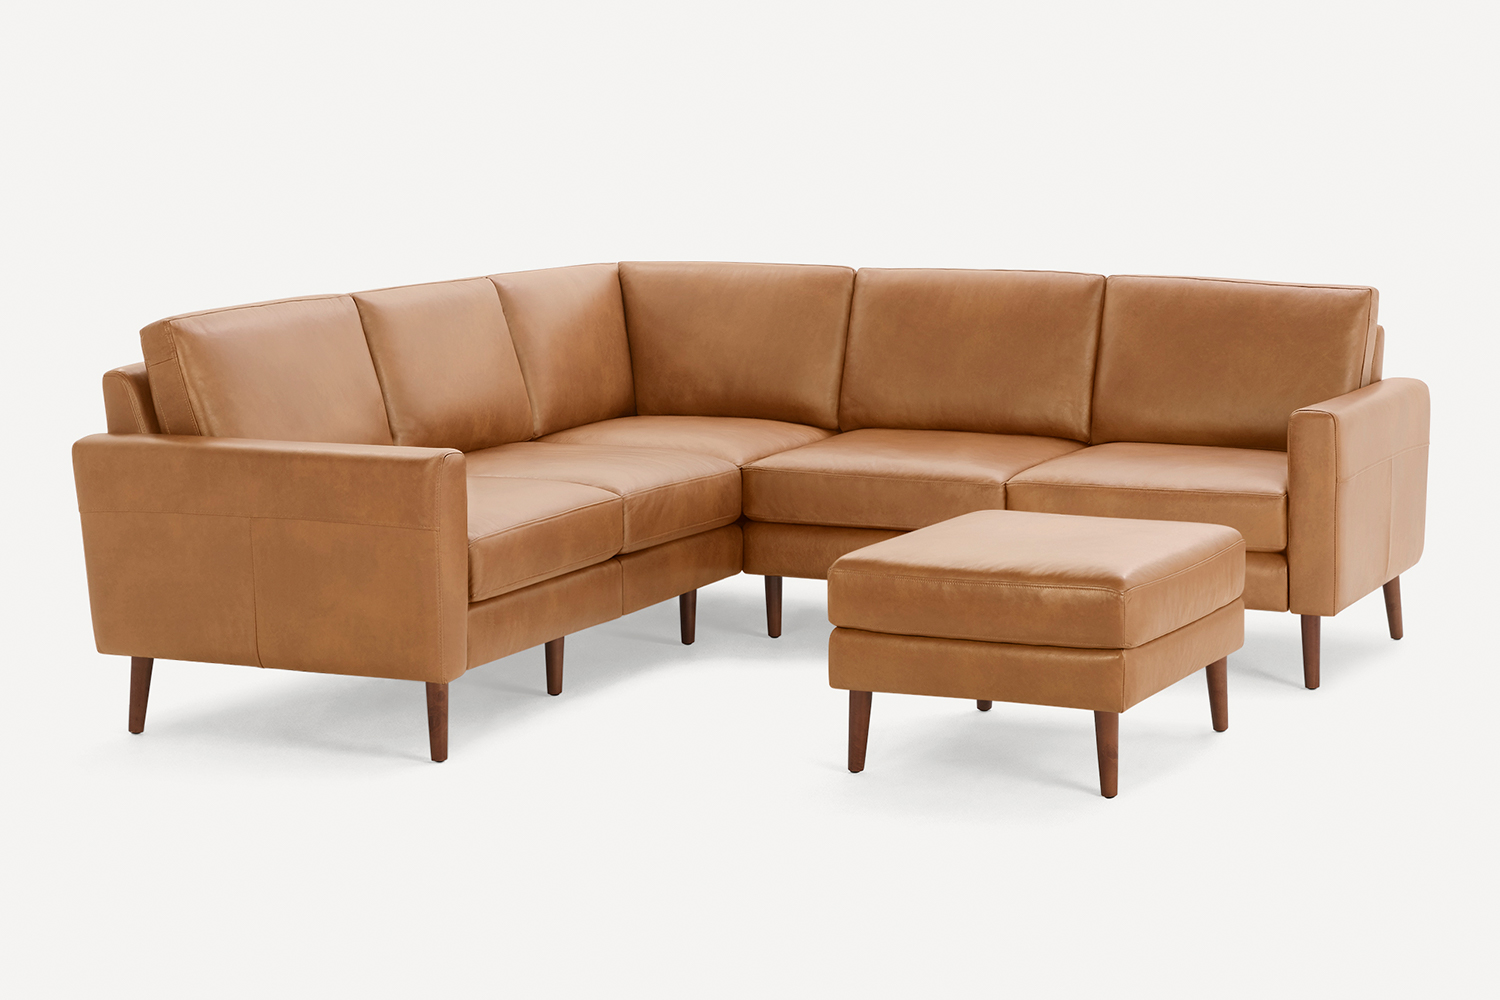 The five-seat Nomad Sofa in leather from Burrow, featuring an ottoman 